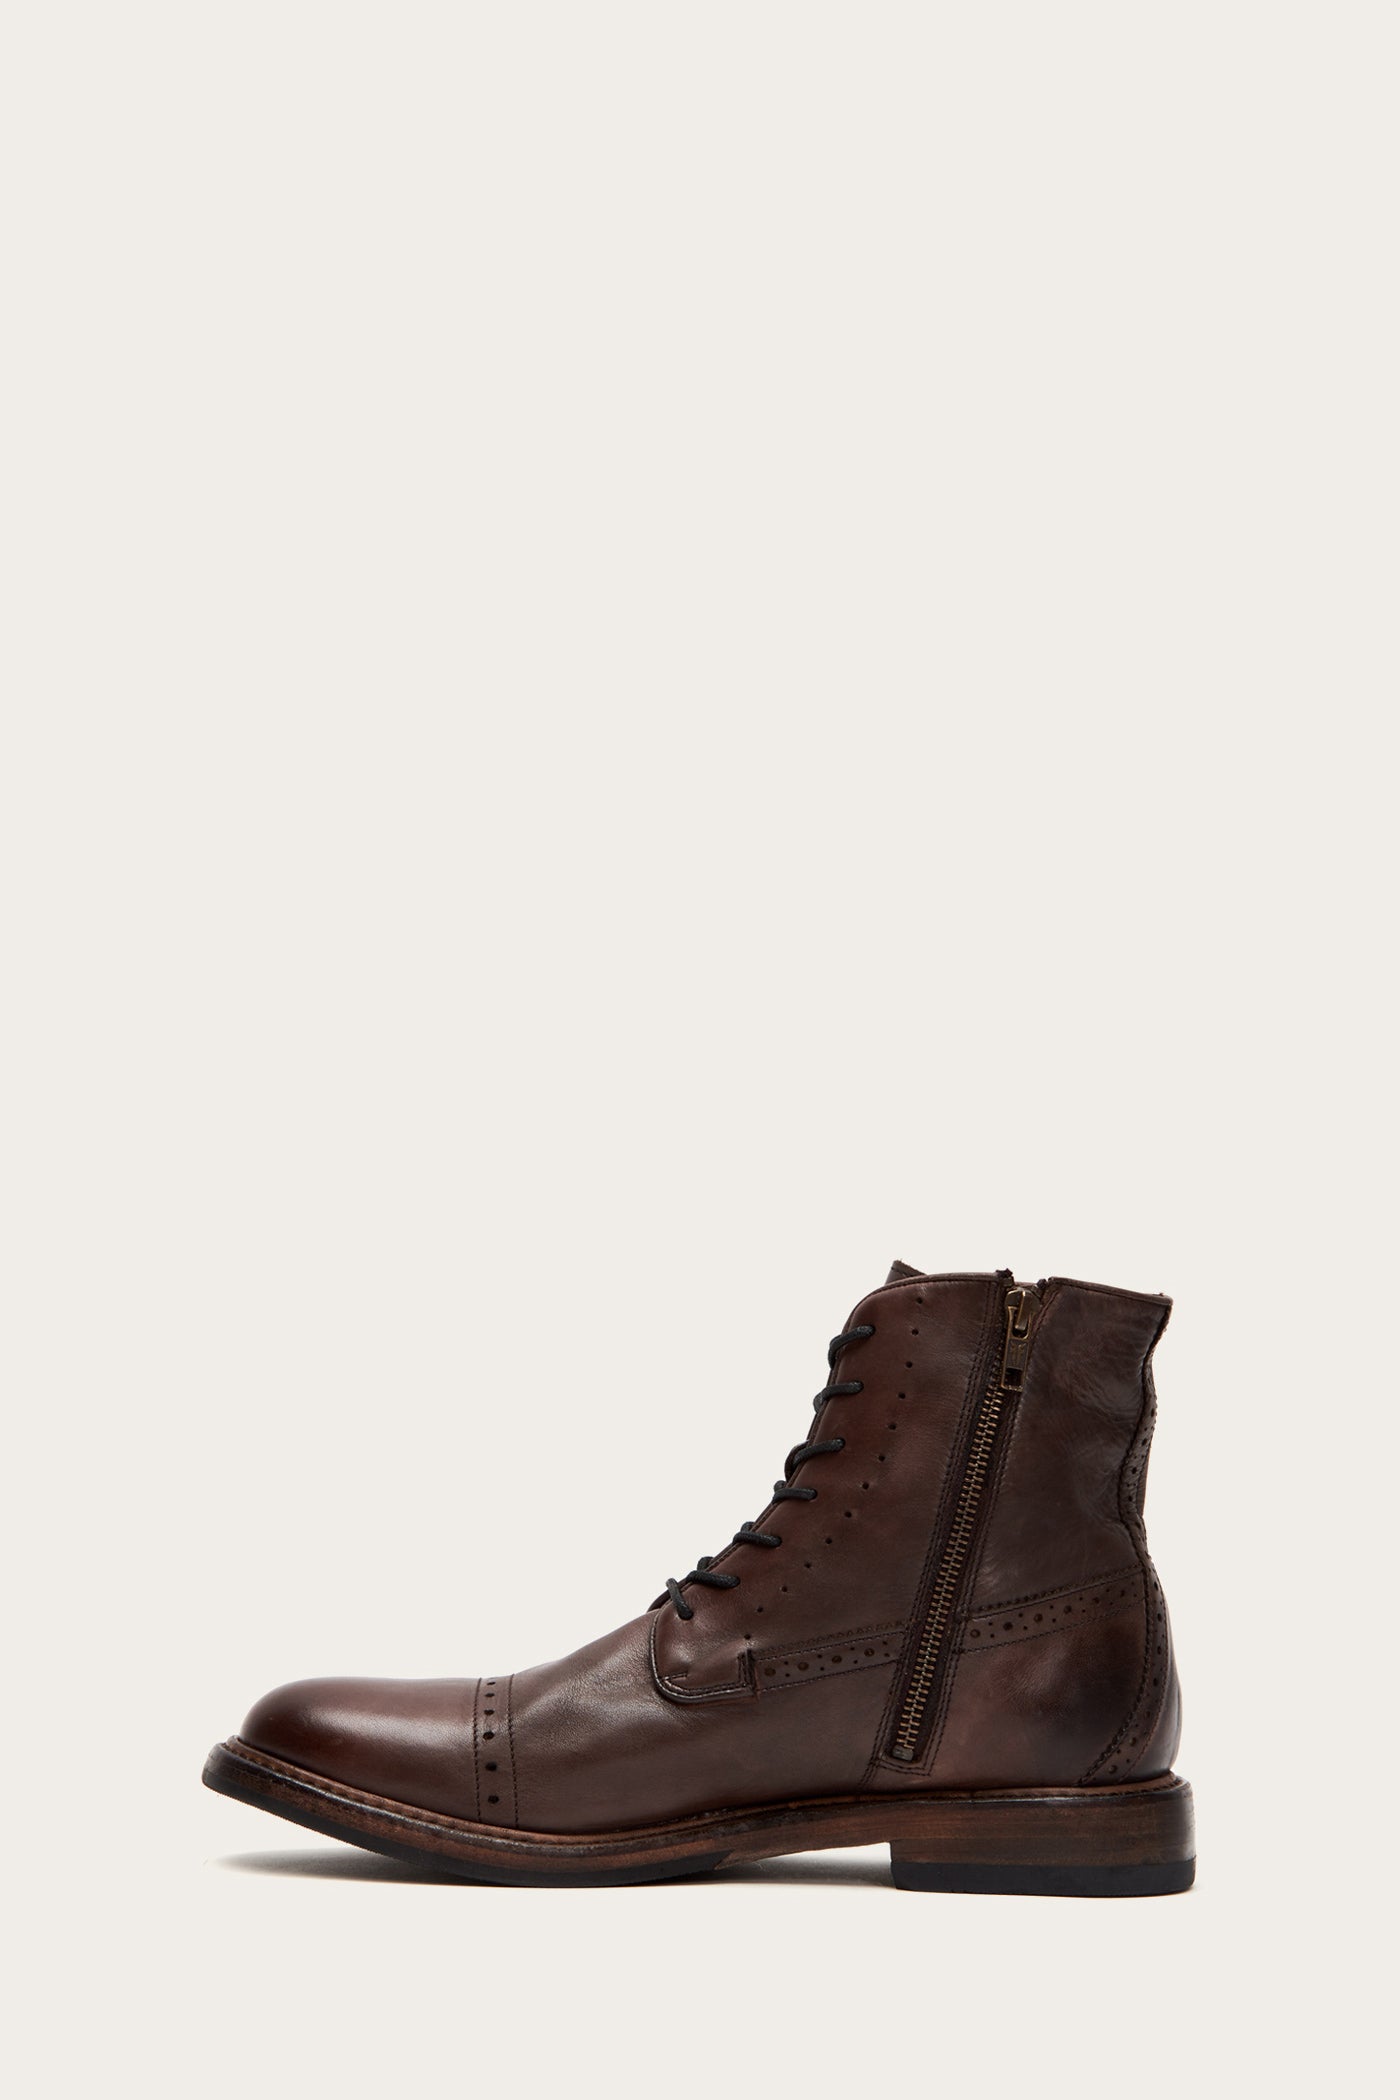 frye murray lace up